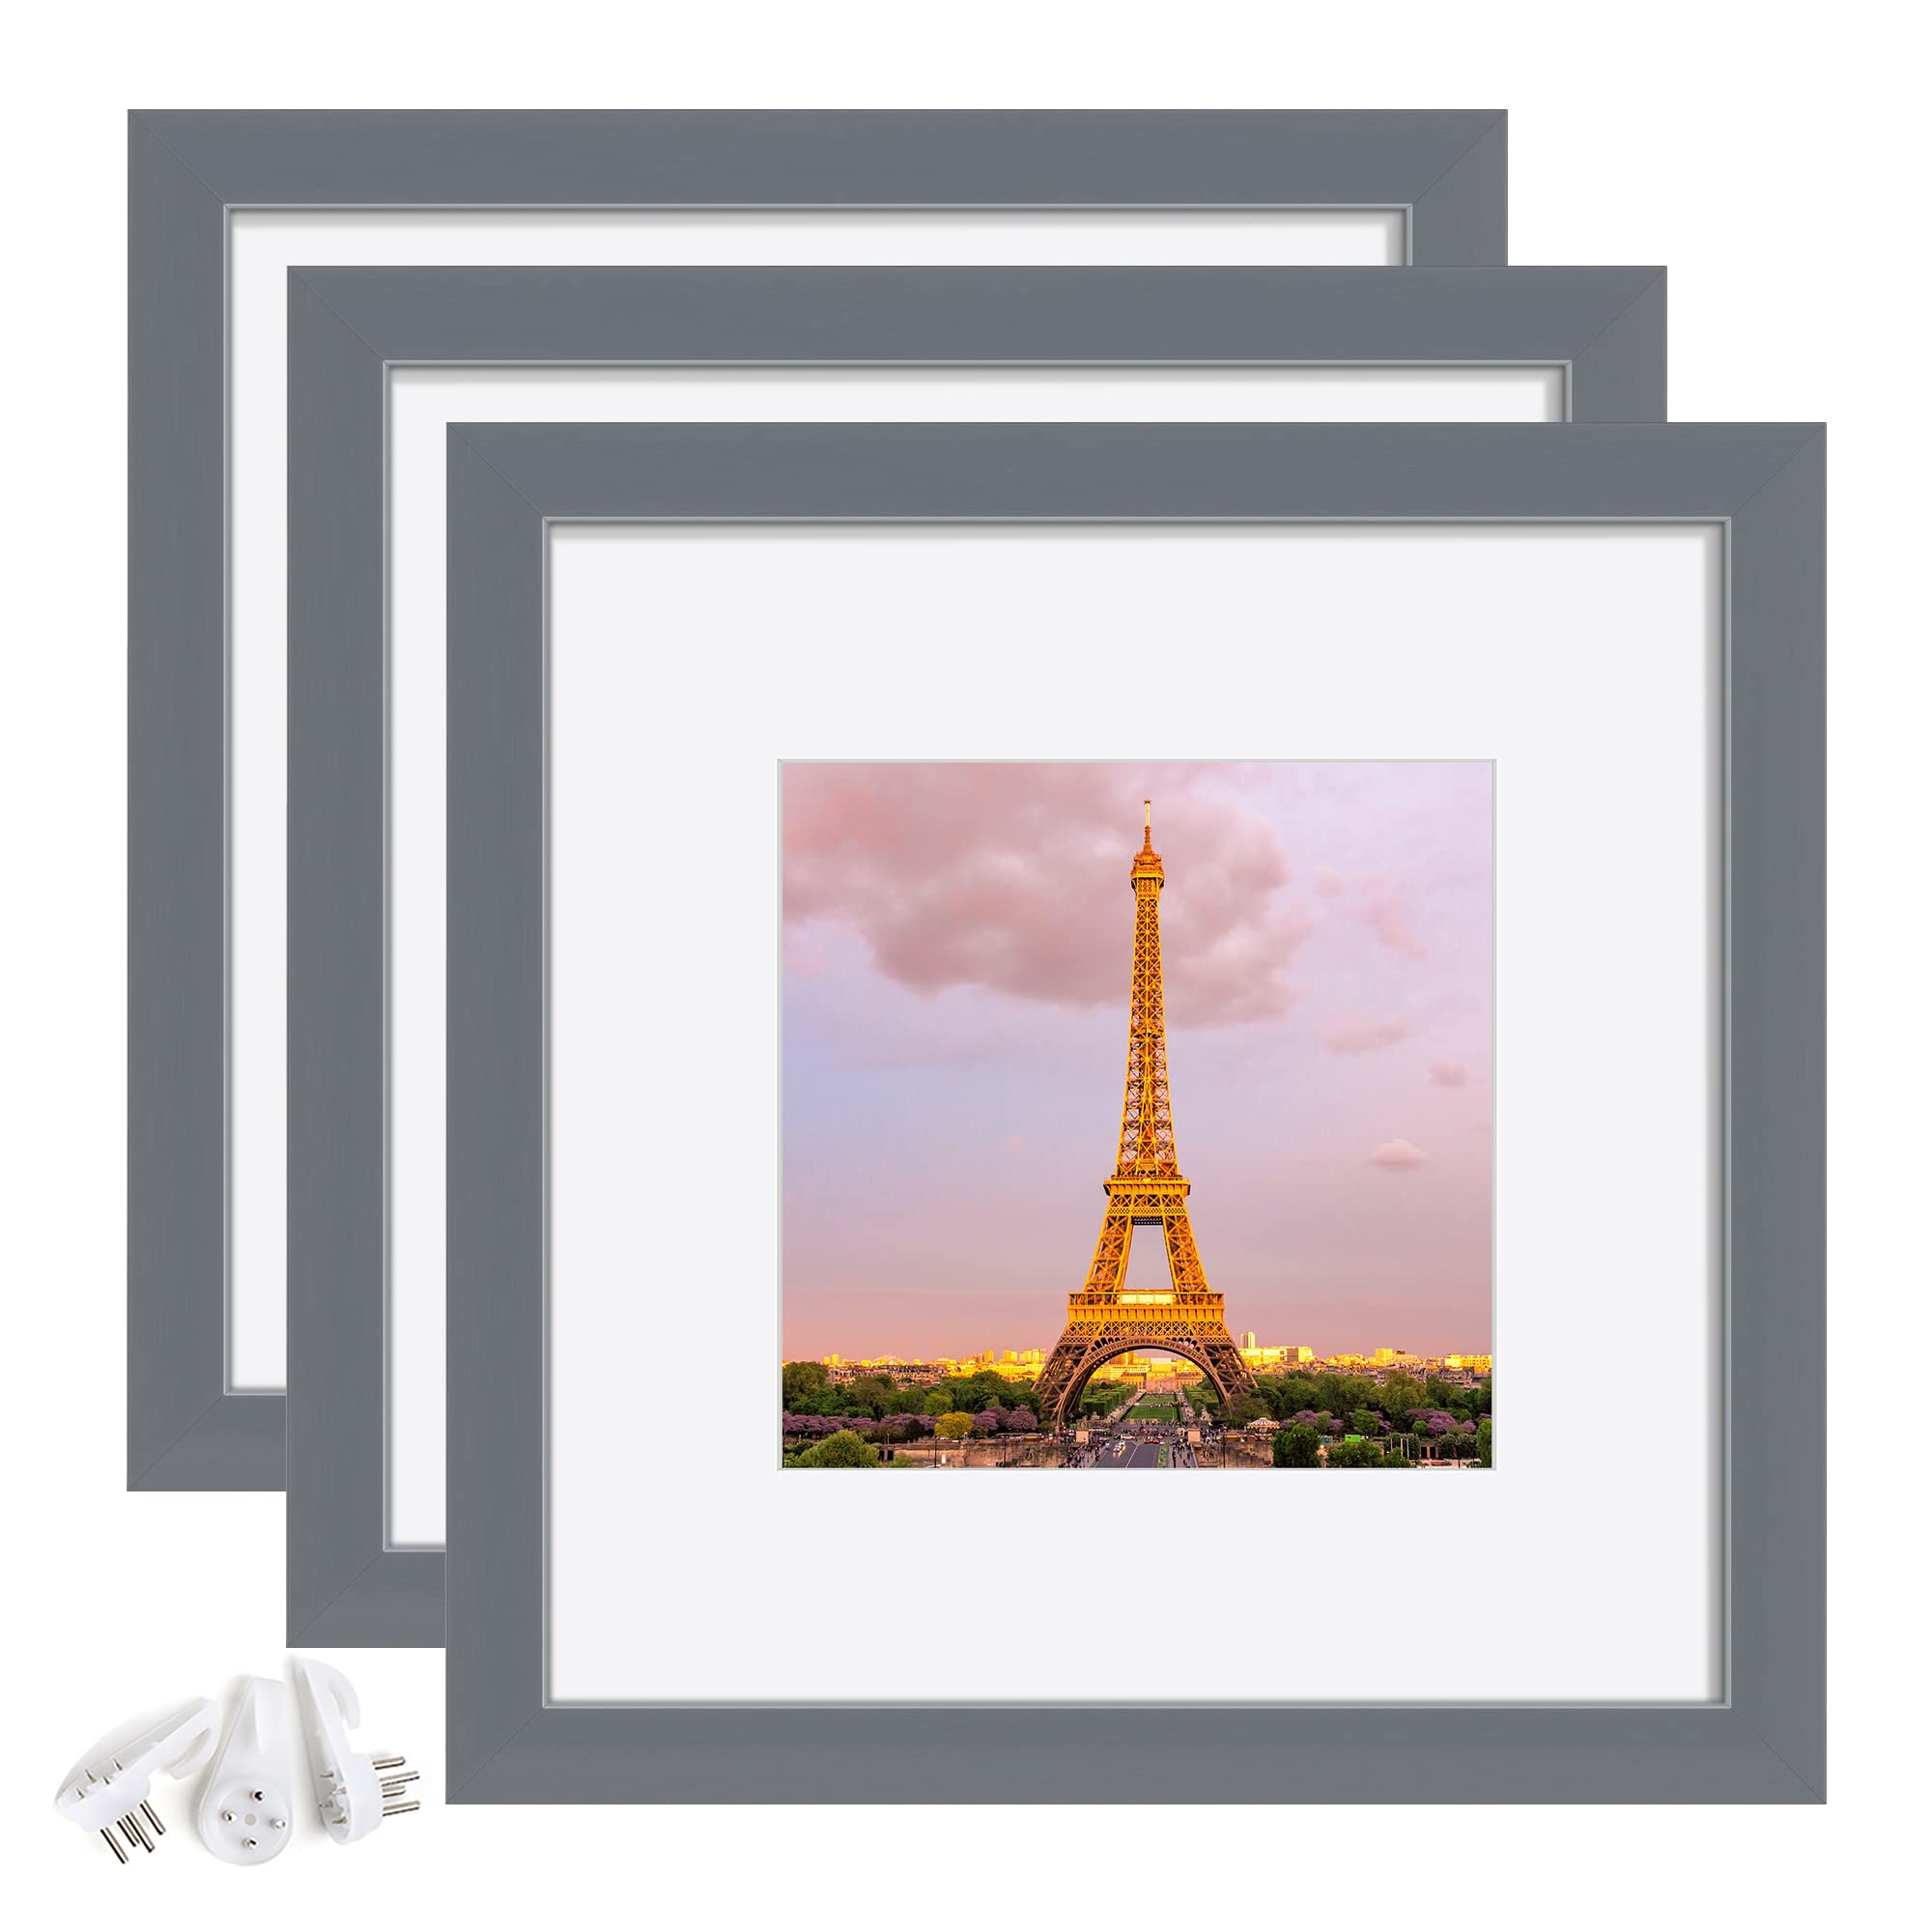 upsimples 8x8 Picture Frame Set of 3, Display Pictures 5x5 with